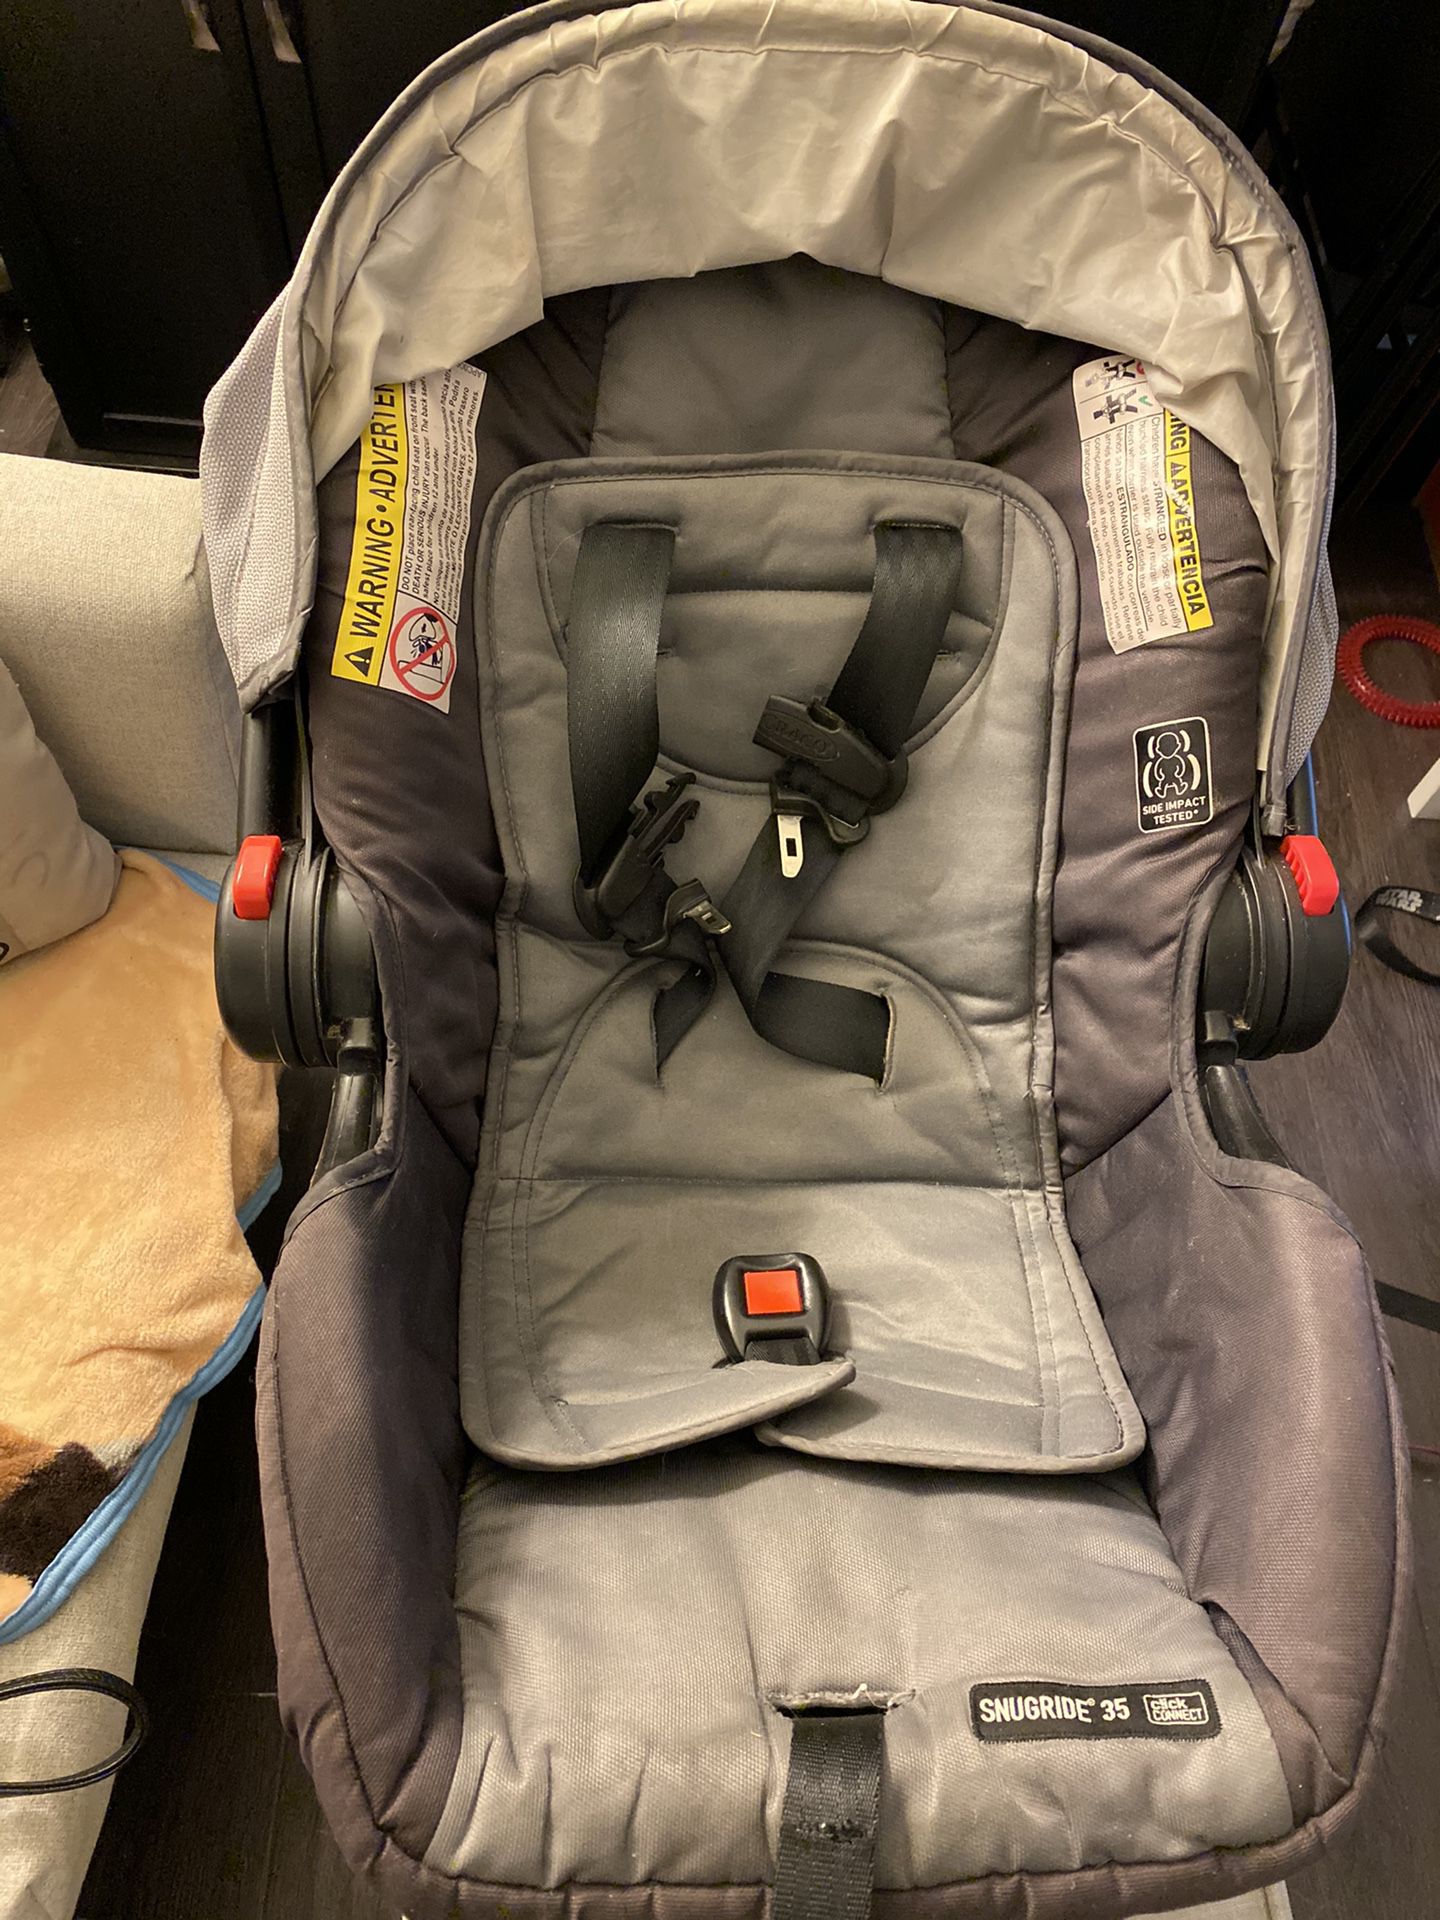 Graco snugride 35 click and connect car seat